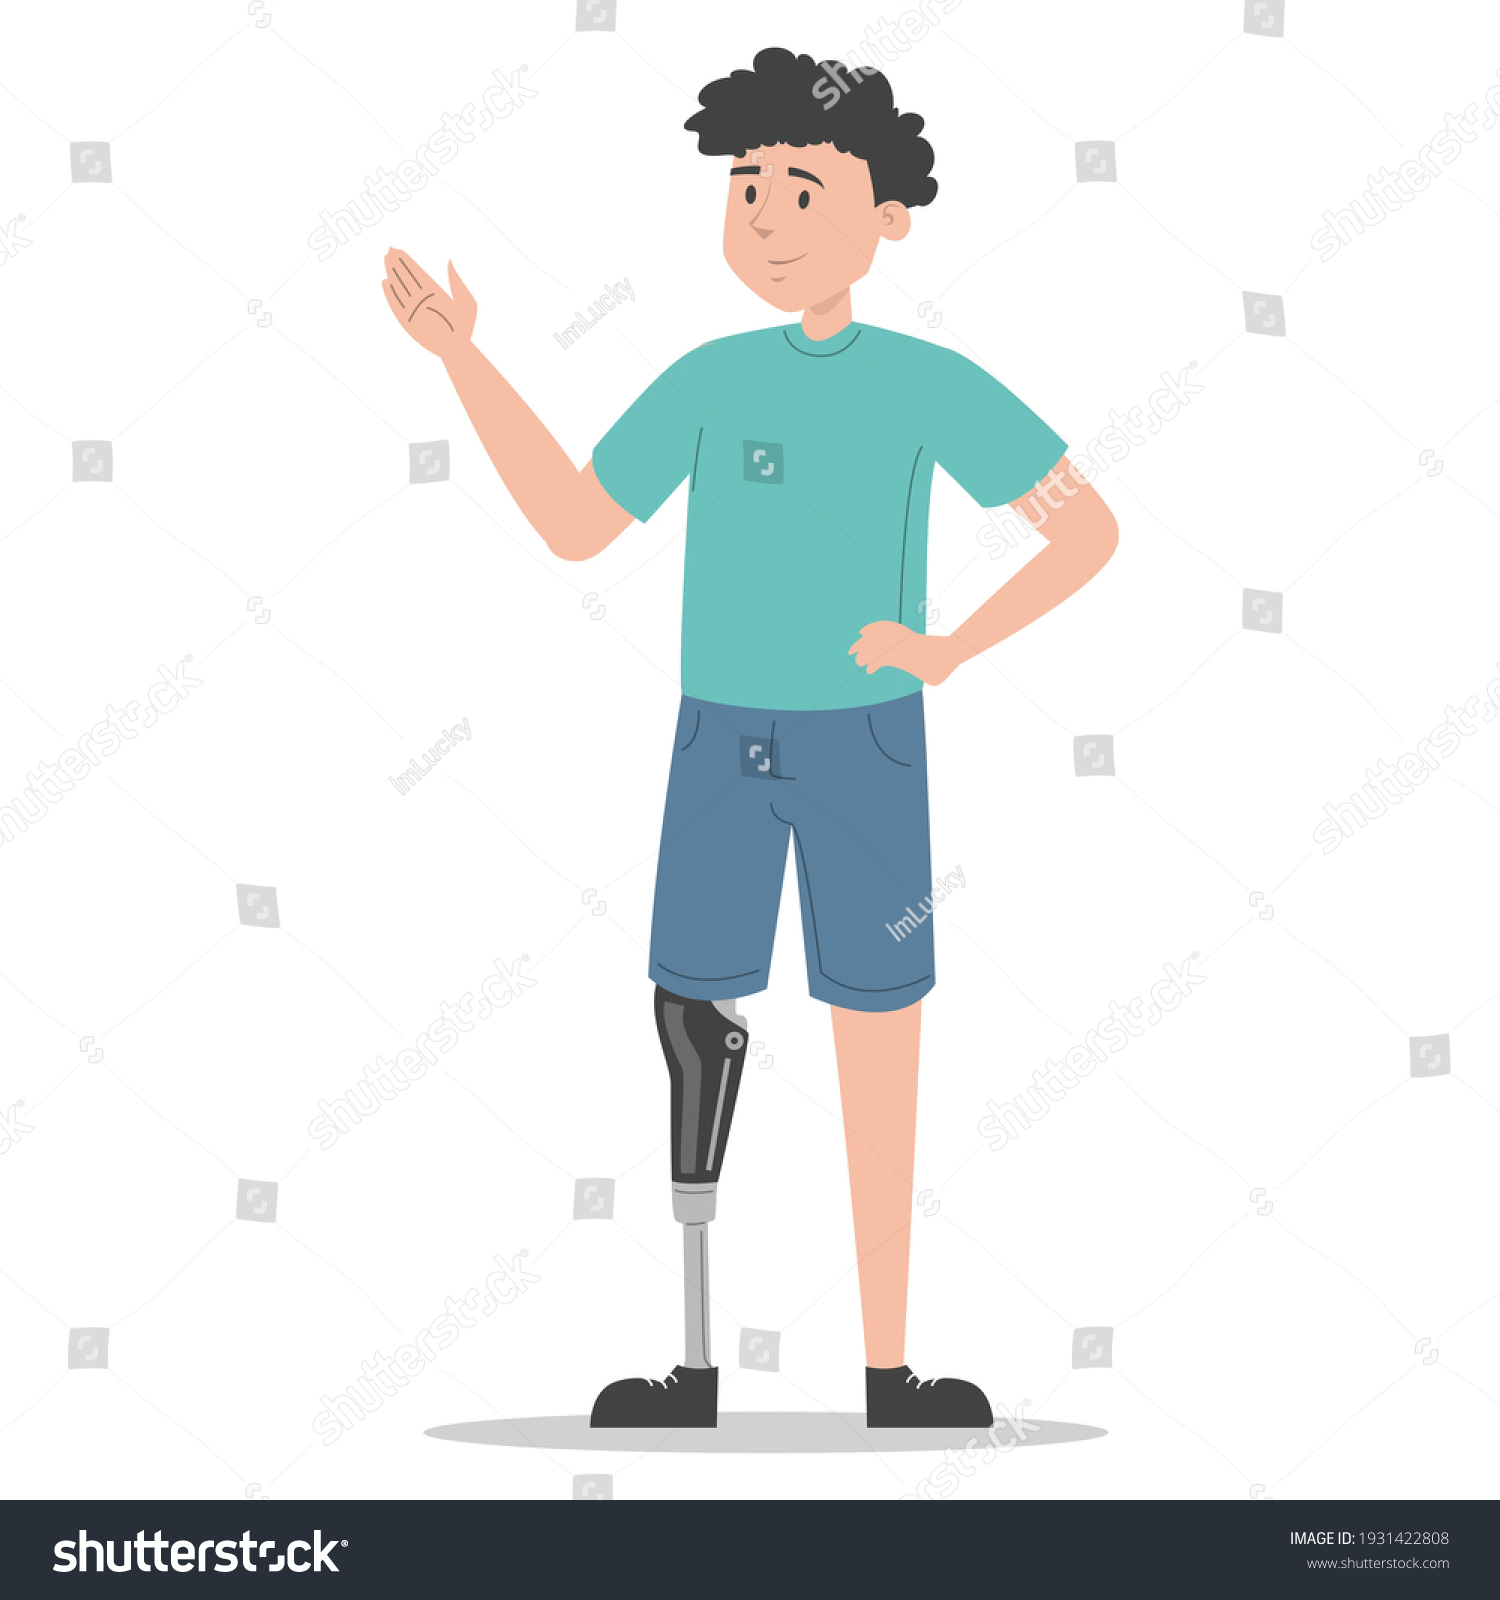 SVG of Happy young man with a prosthetic leg vector isolated. Illustration of young adult wearing a prosthesis. Handicapped person, male character with artificial limb. svg